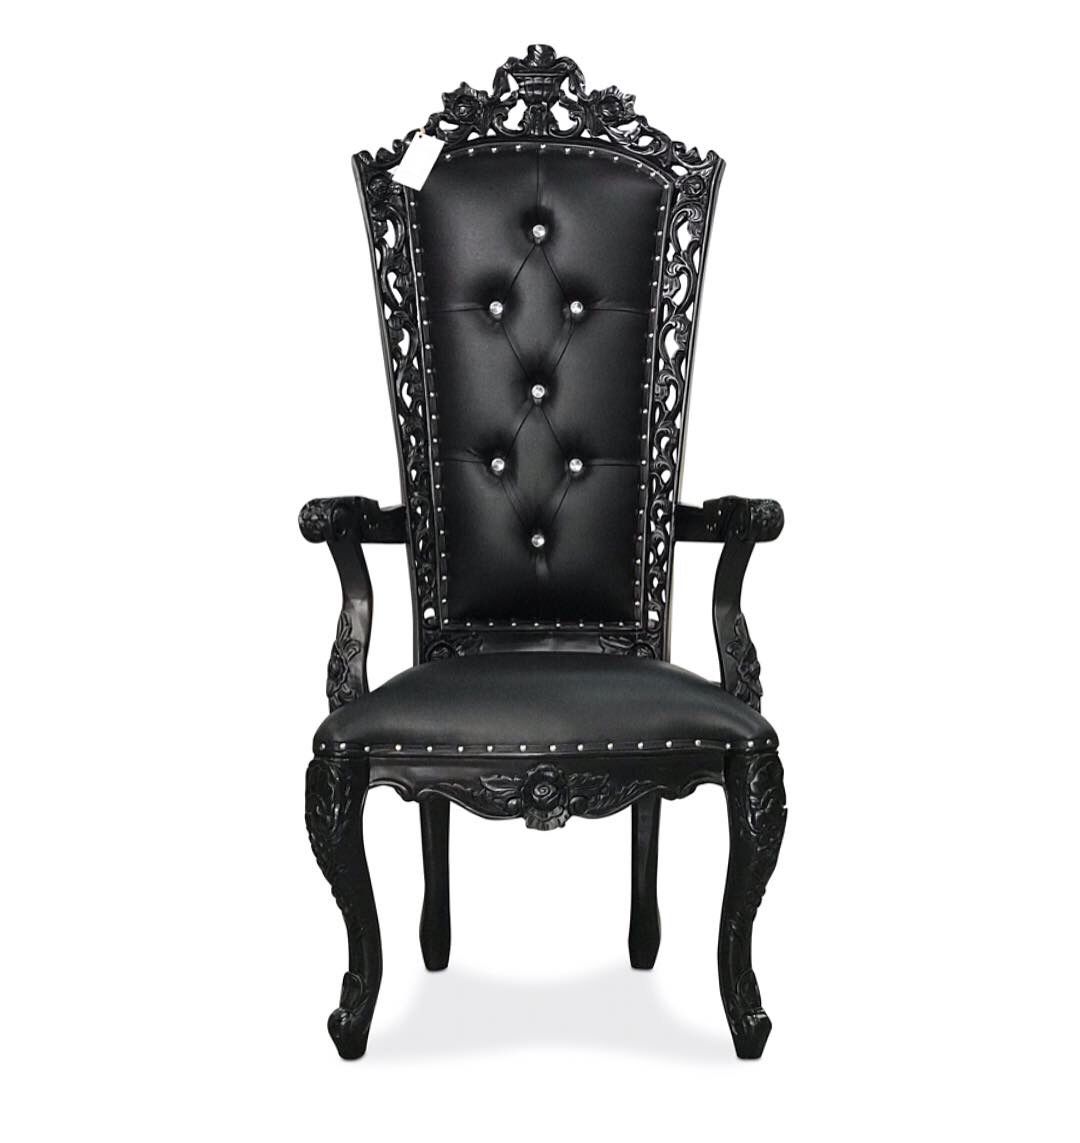 58” baroque king queen princess royal baroque wedding event party photography boutique hotel furniture throne chair armchair hand crafted